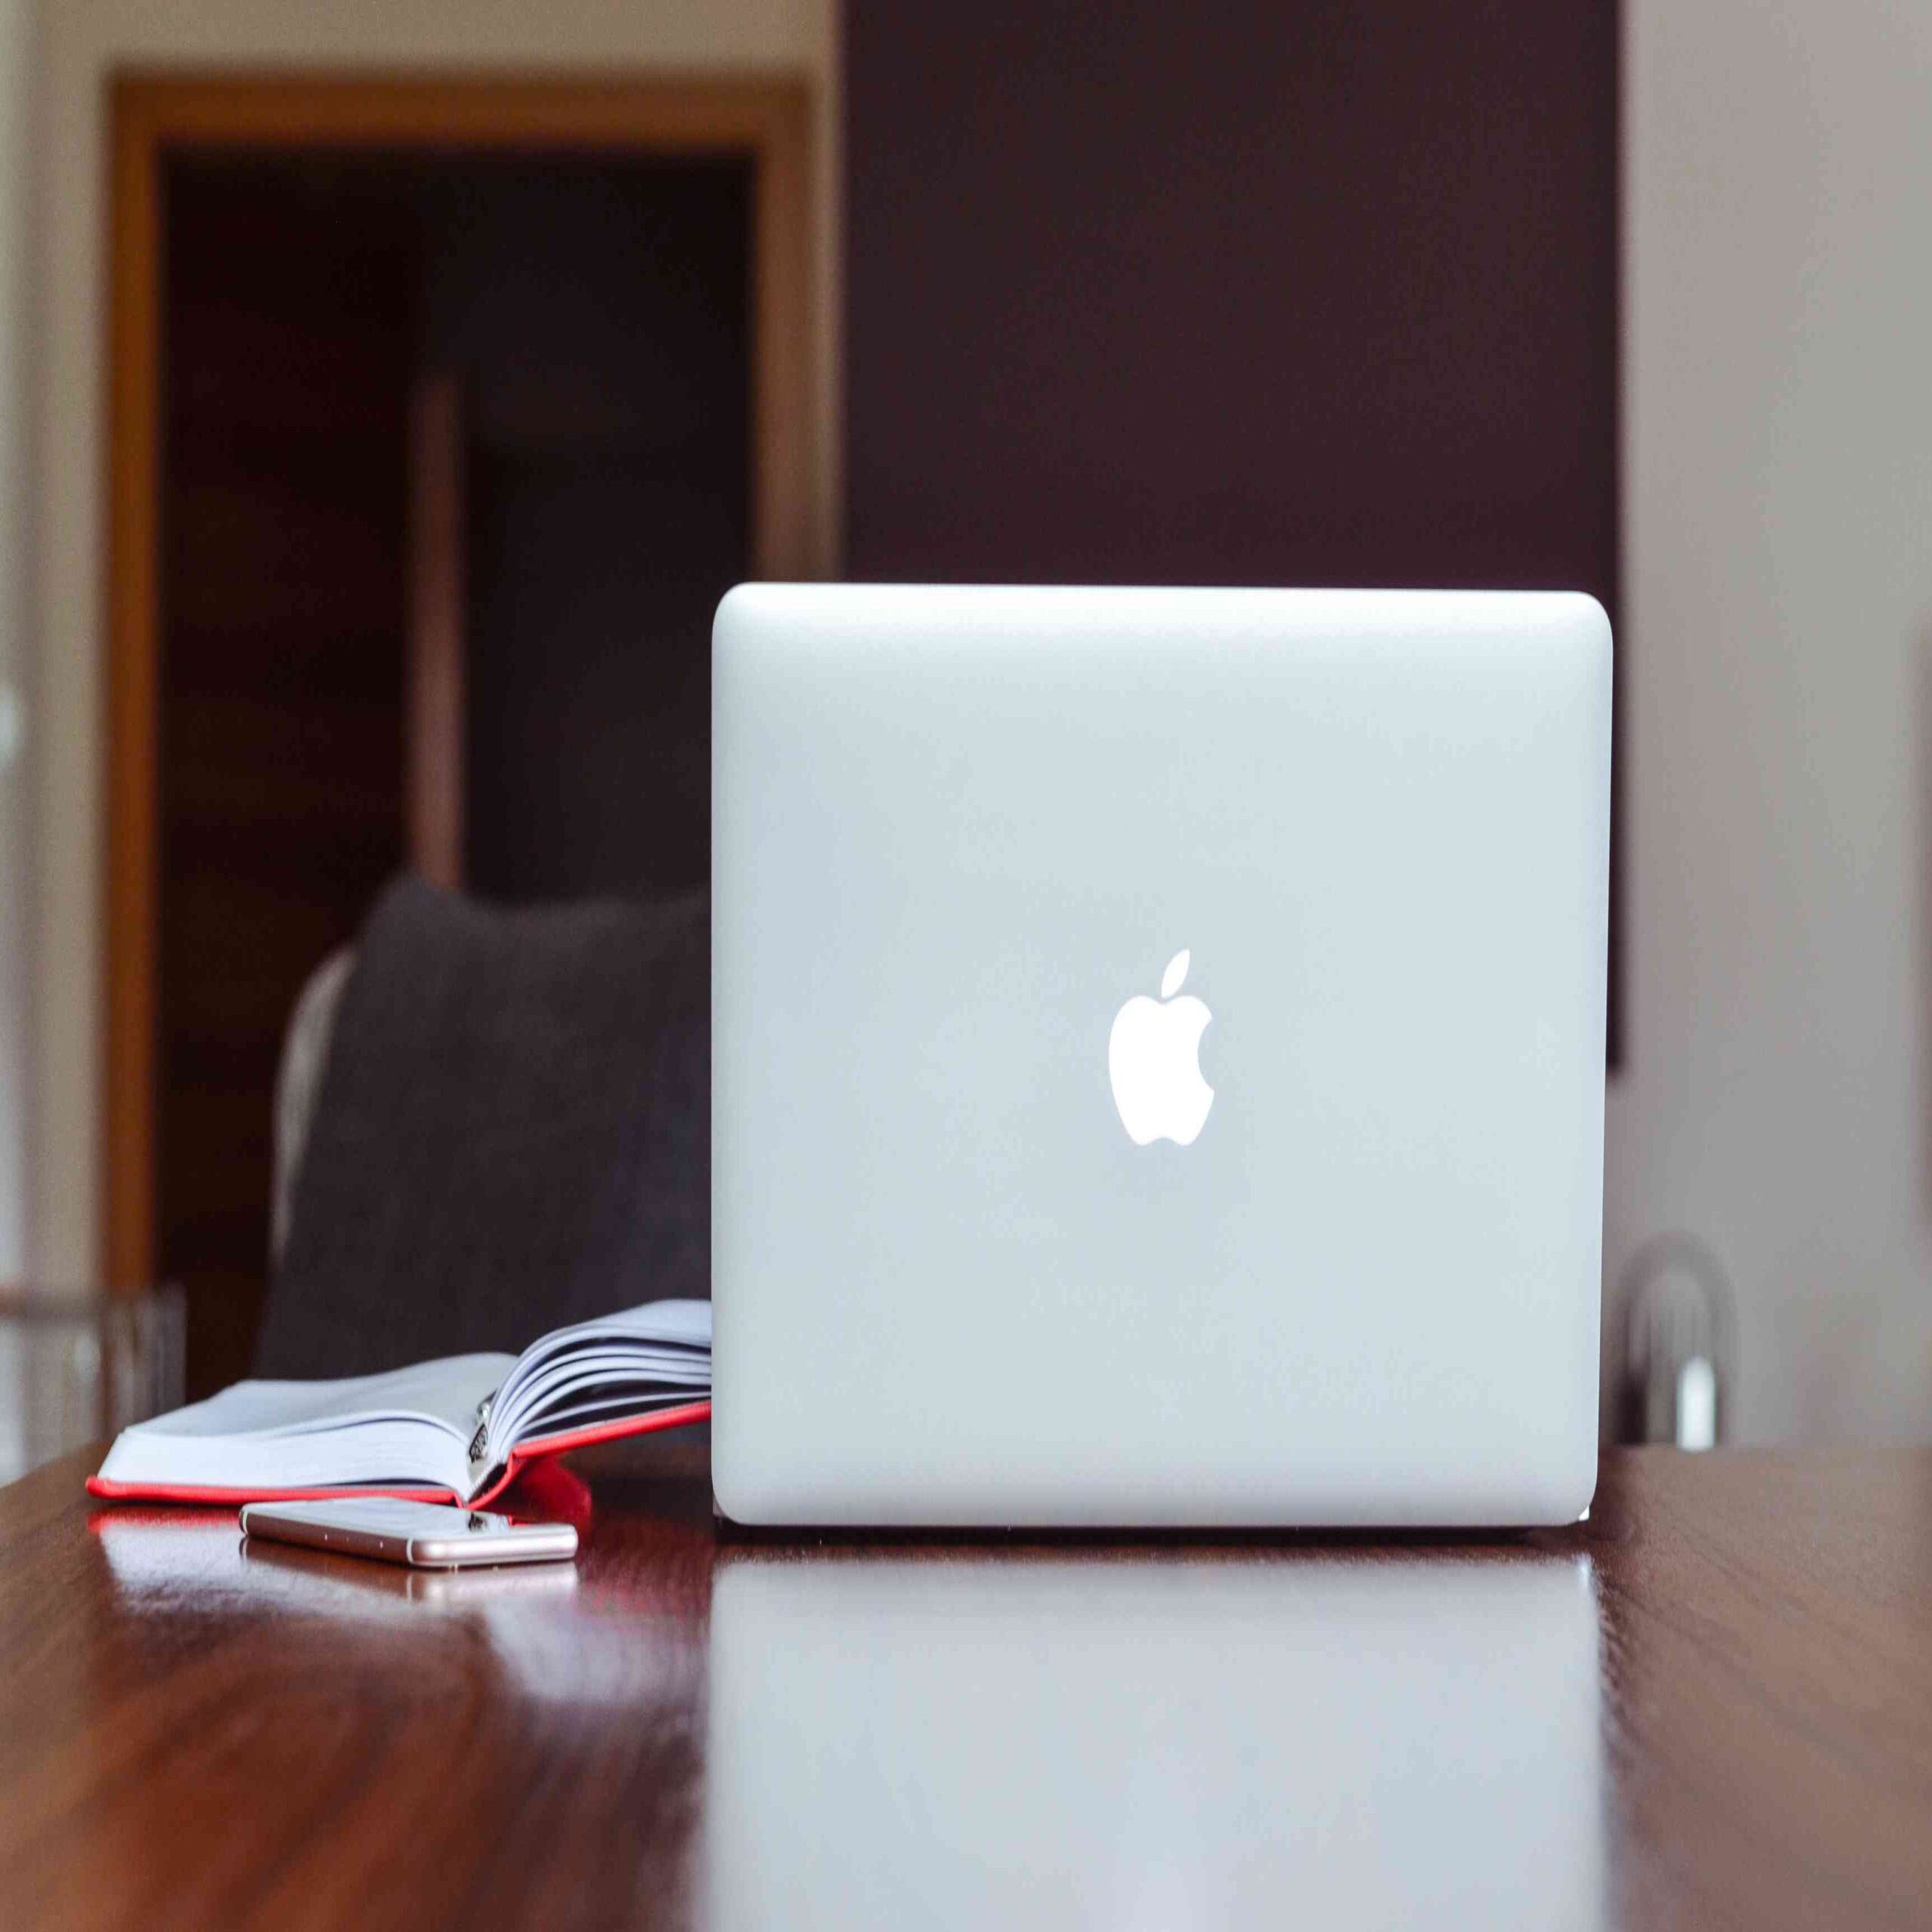 Just got a new MacBook? Here is how to get started with your MacBook.